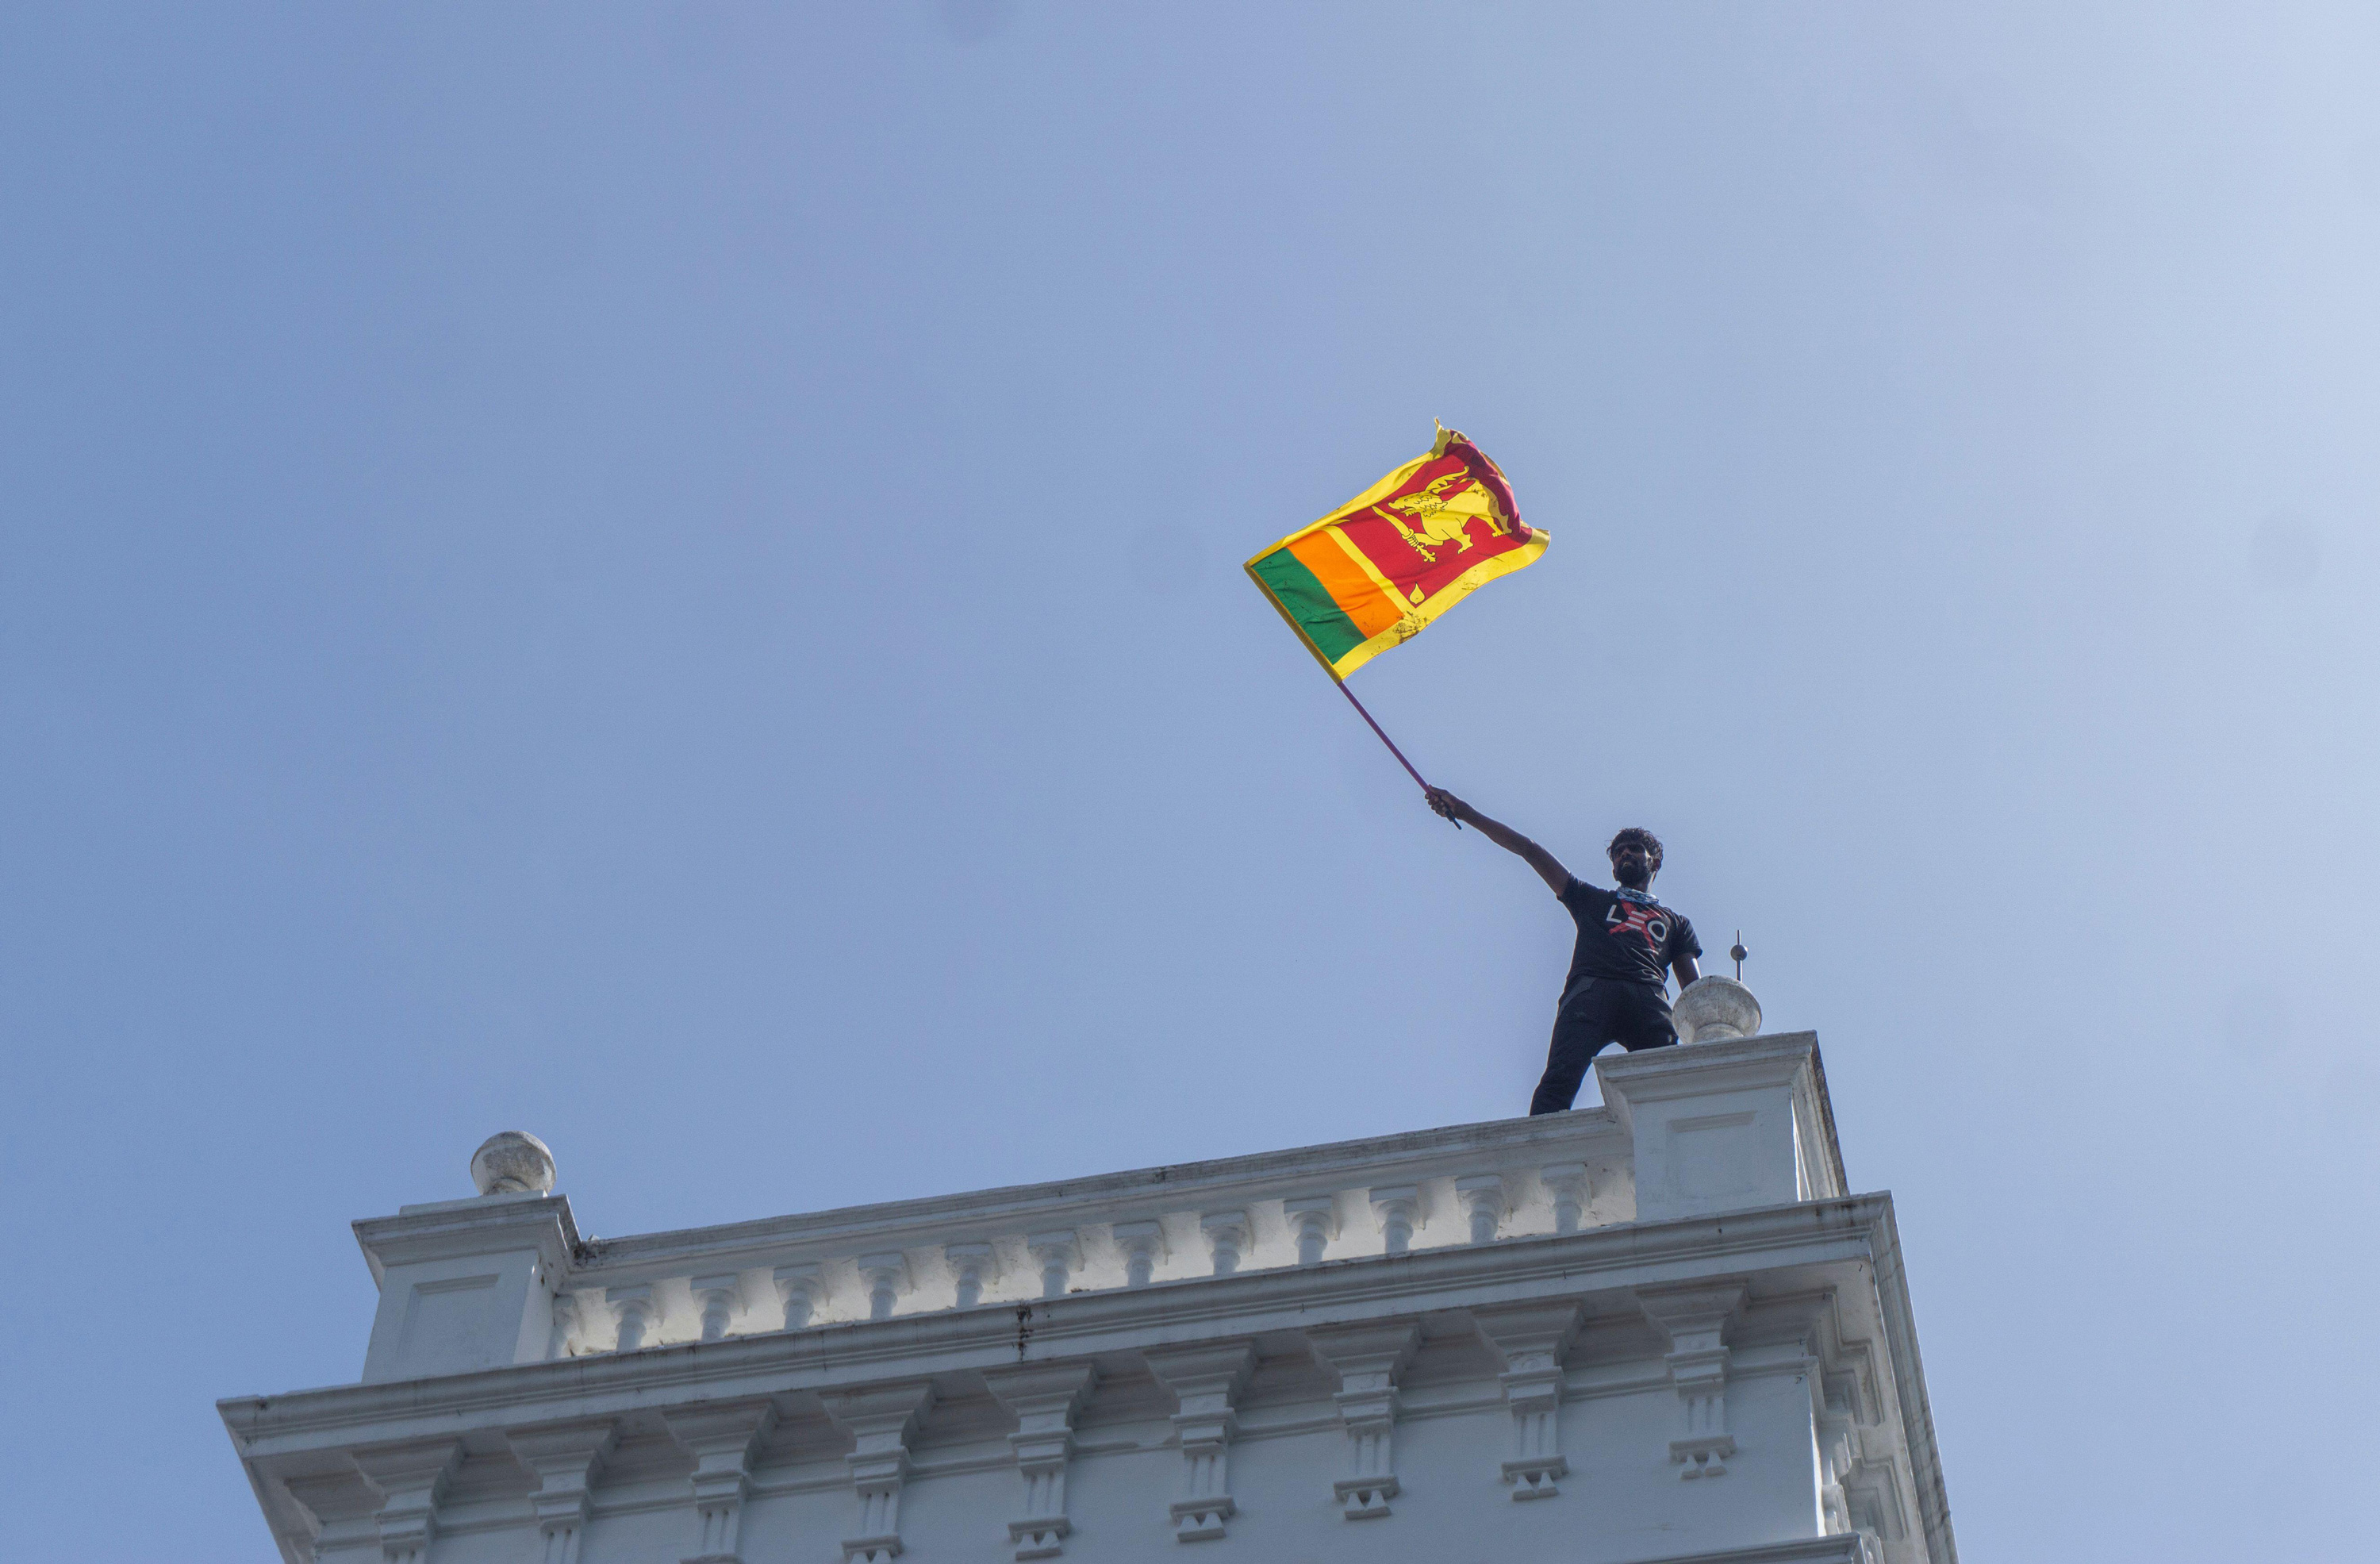 A protester waves a Sri Lankan flag while standing atop prime minister Ranil Wickremesinghe's office in Colombo on July 13, 2022. Hundreds of protesters stormed the office amid the deep political and economic crisis in the country which led to months of widespread protests.